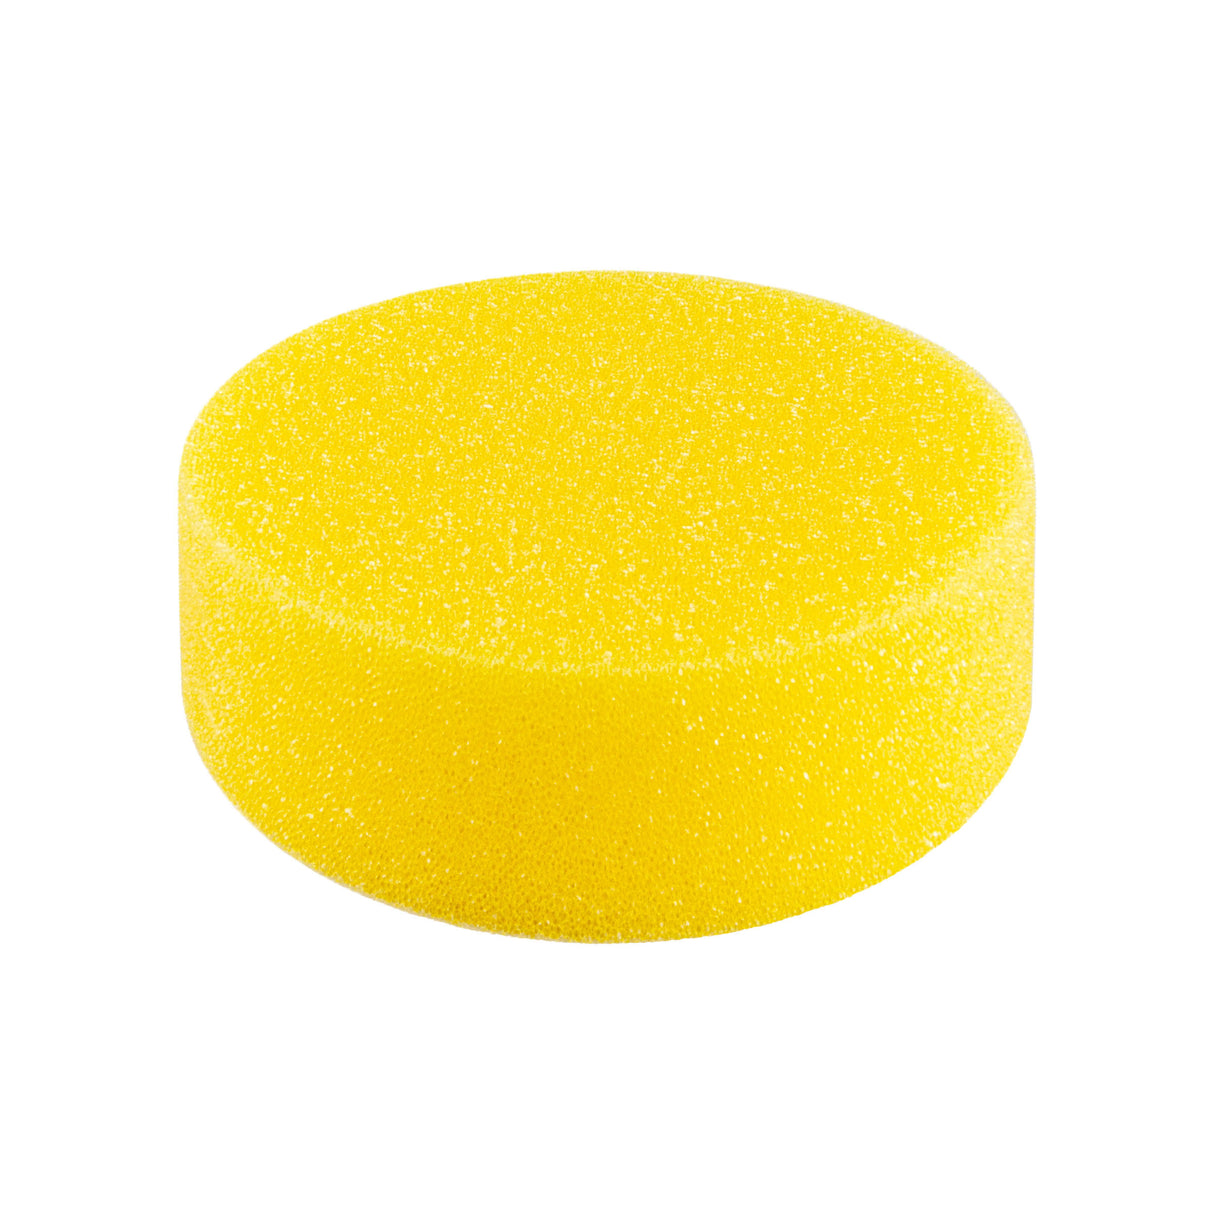 Soft99 King of Gloss Light Wax 300g | Shop at Just Car Care